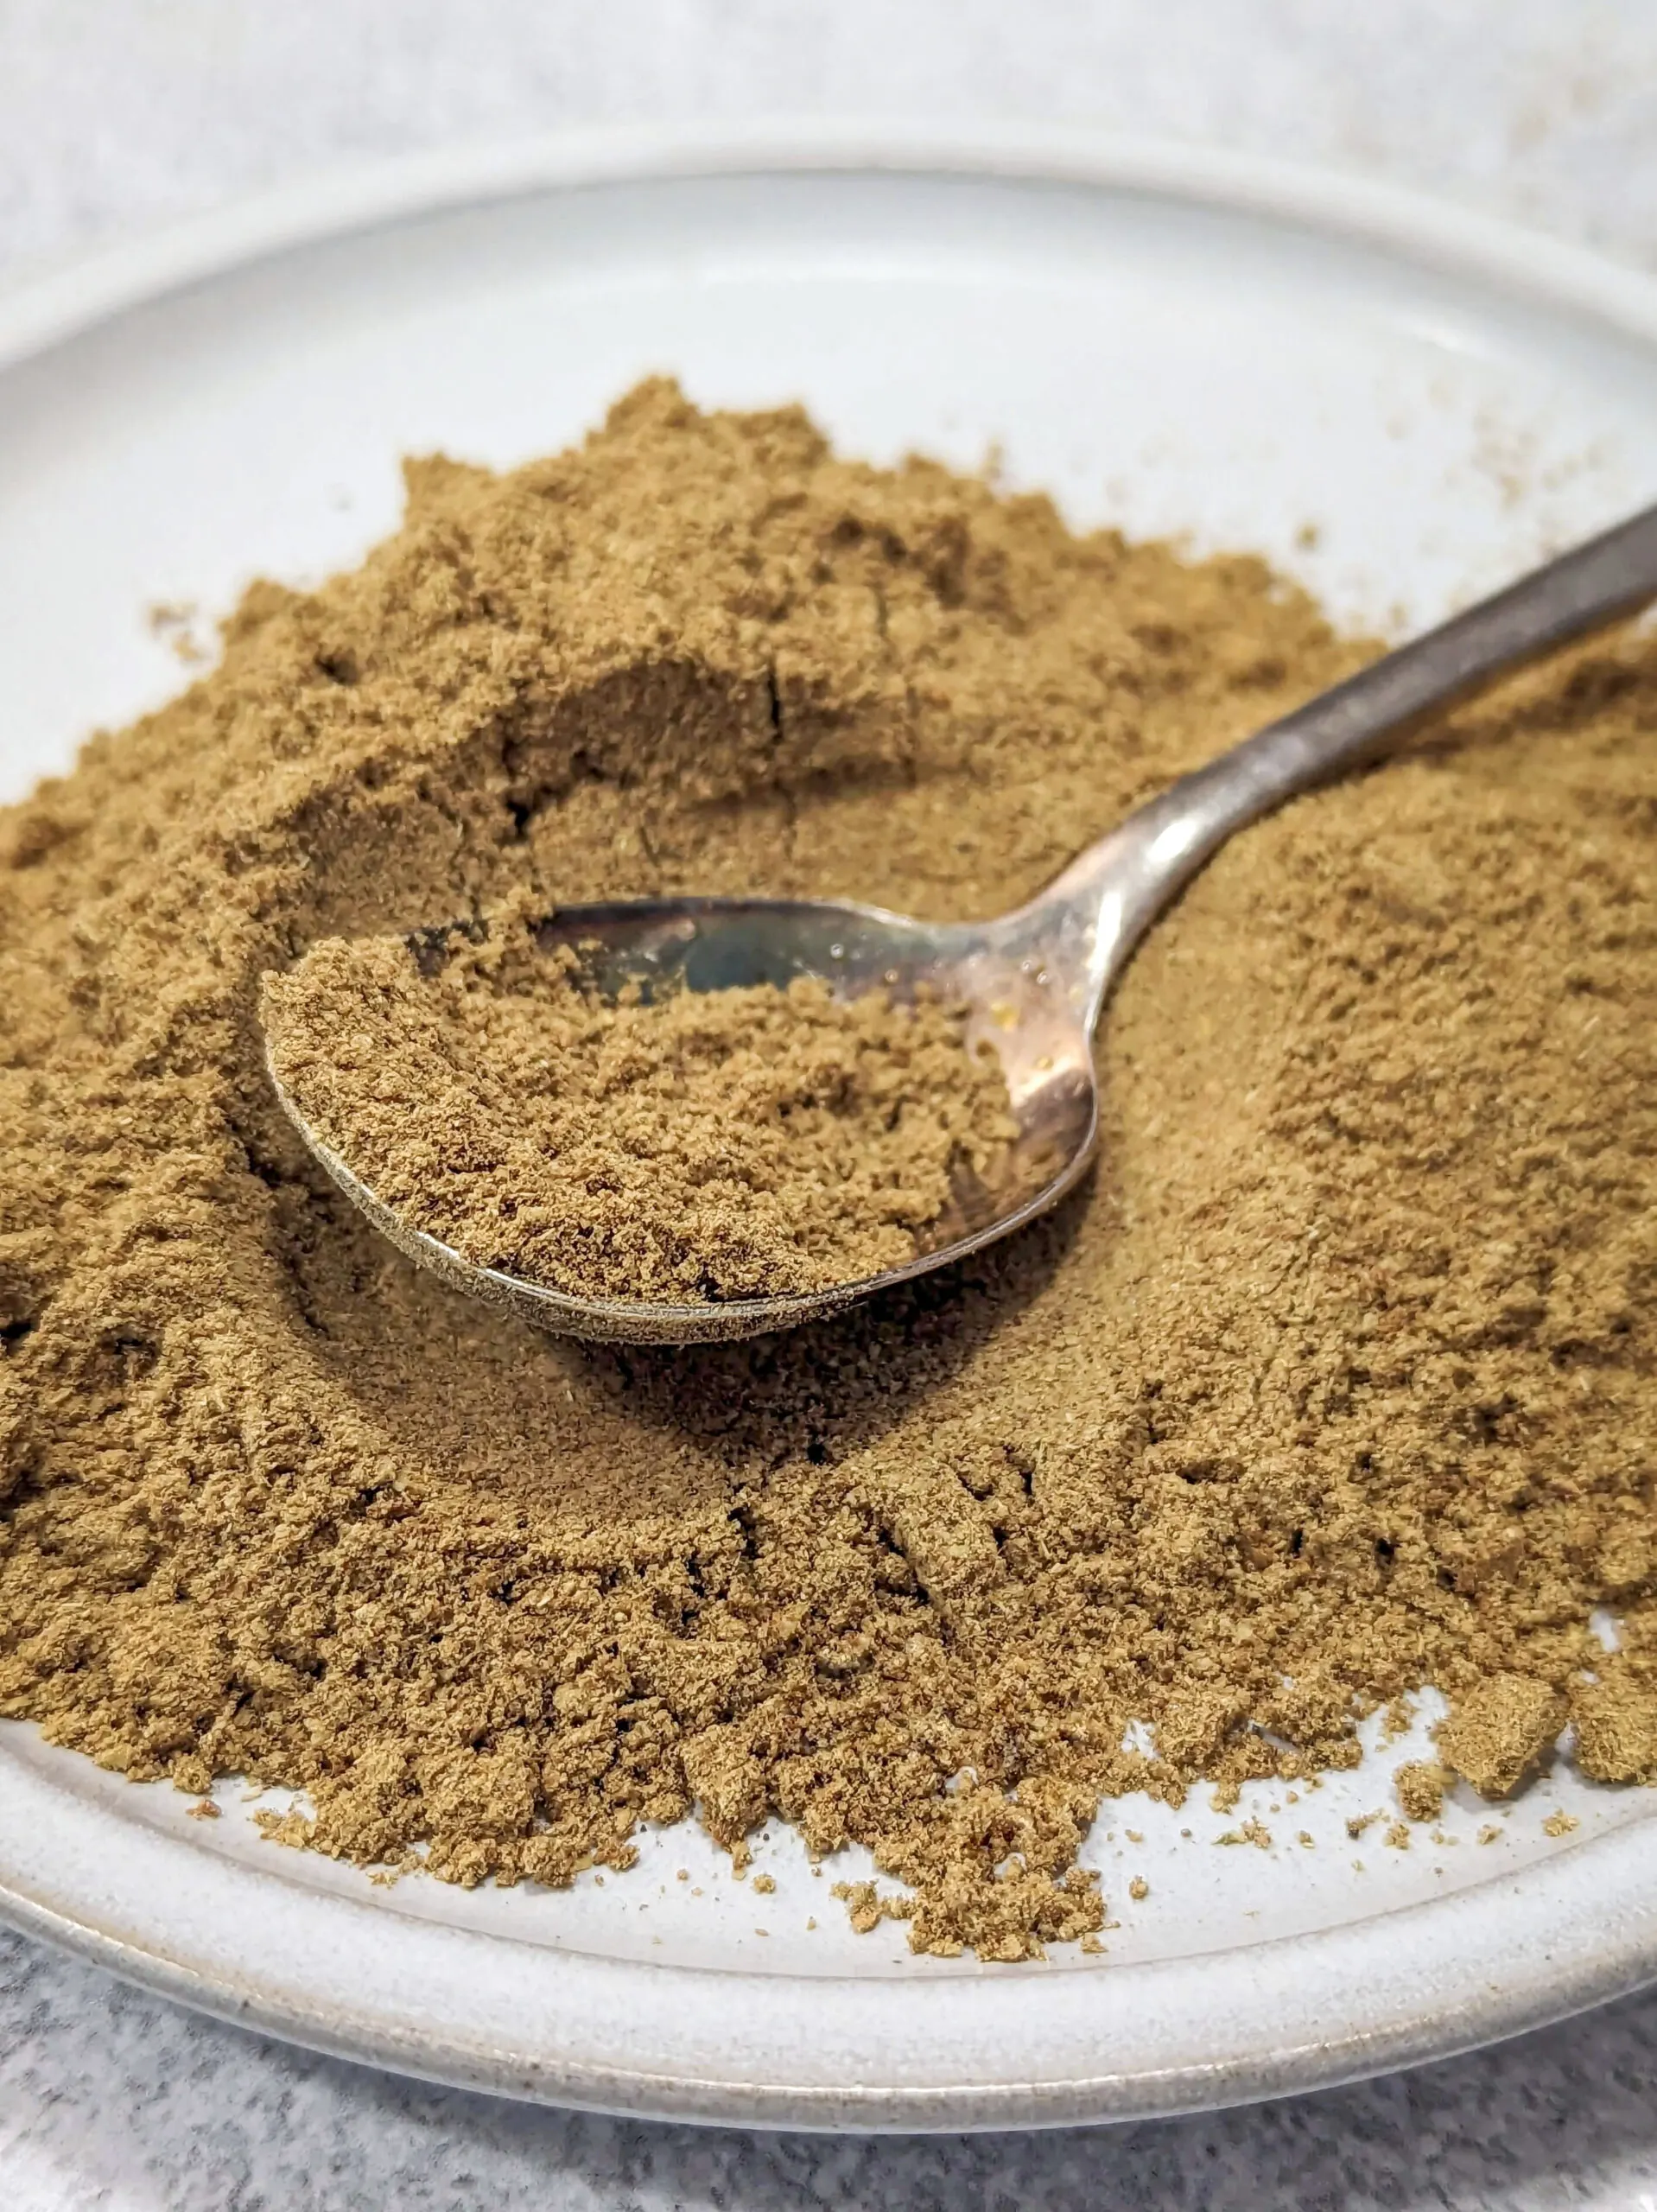 A spoon of Chinese 5 spice over a plate of the spice mixture.